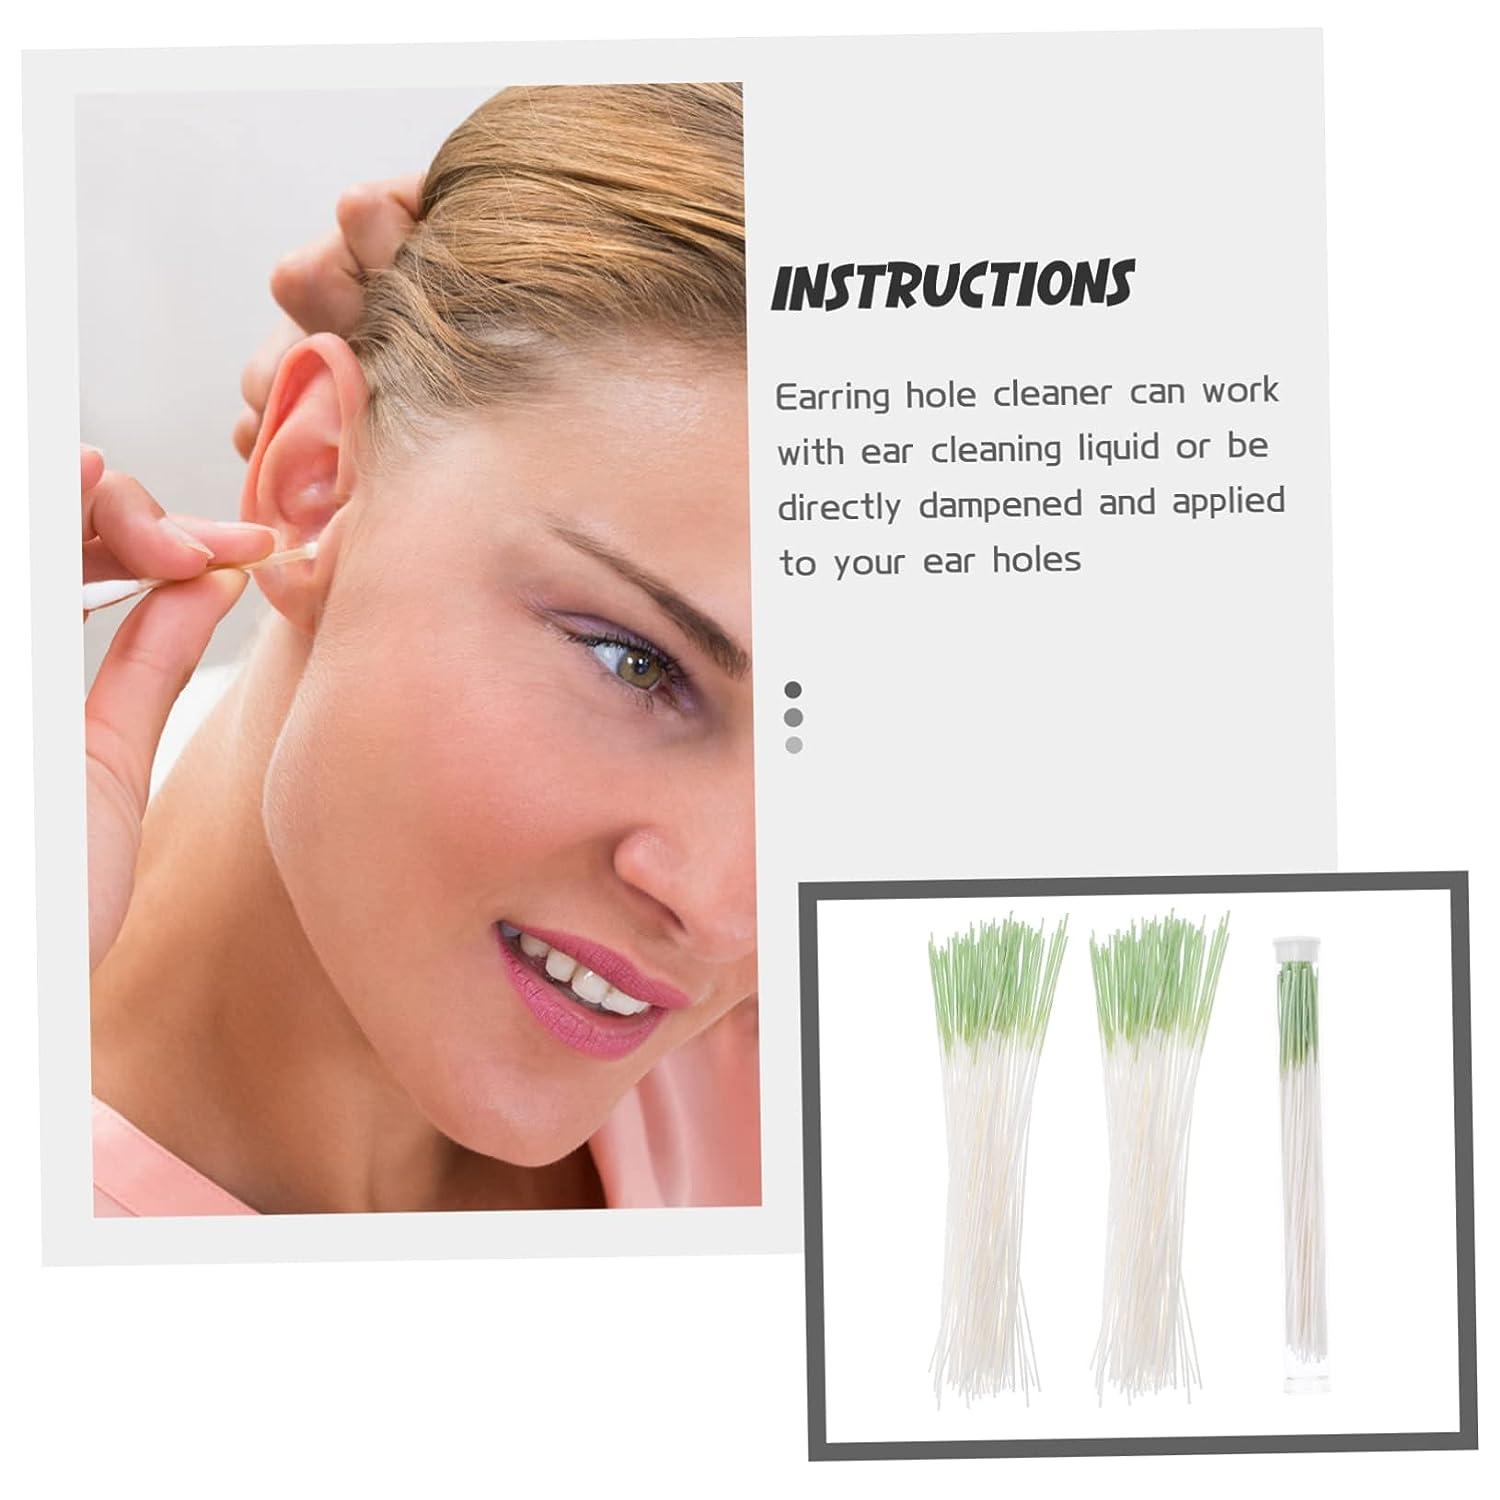 Total War 9 Sets Ear Cleaning Line Earring Hole Disposable Ear Floss Ear  Hole Cleaning Tools Household Cleaner Cleaning Accessories Ear Cleaners  Portable Ear Hole Cleaner Major Pp 10x0.1x0.1cmx3pcs Light Greenx3pcs